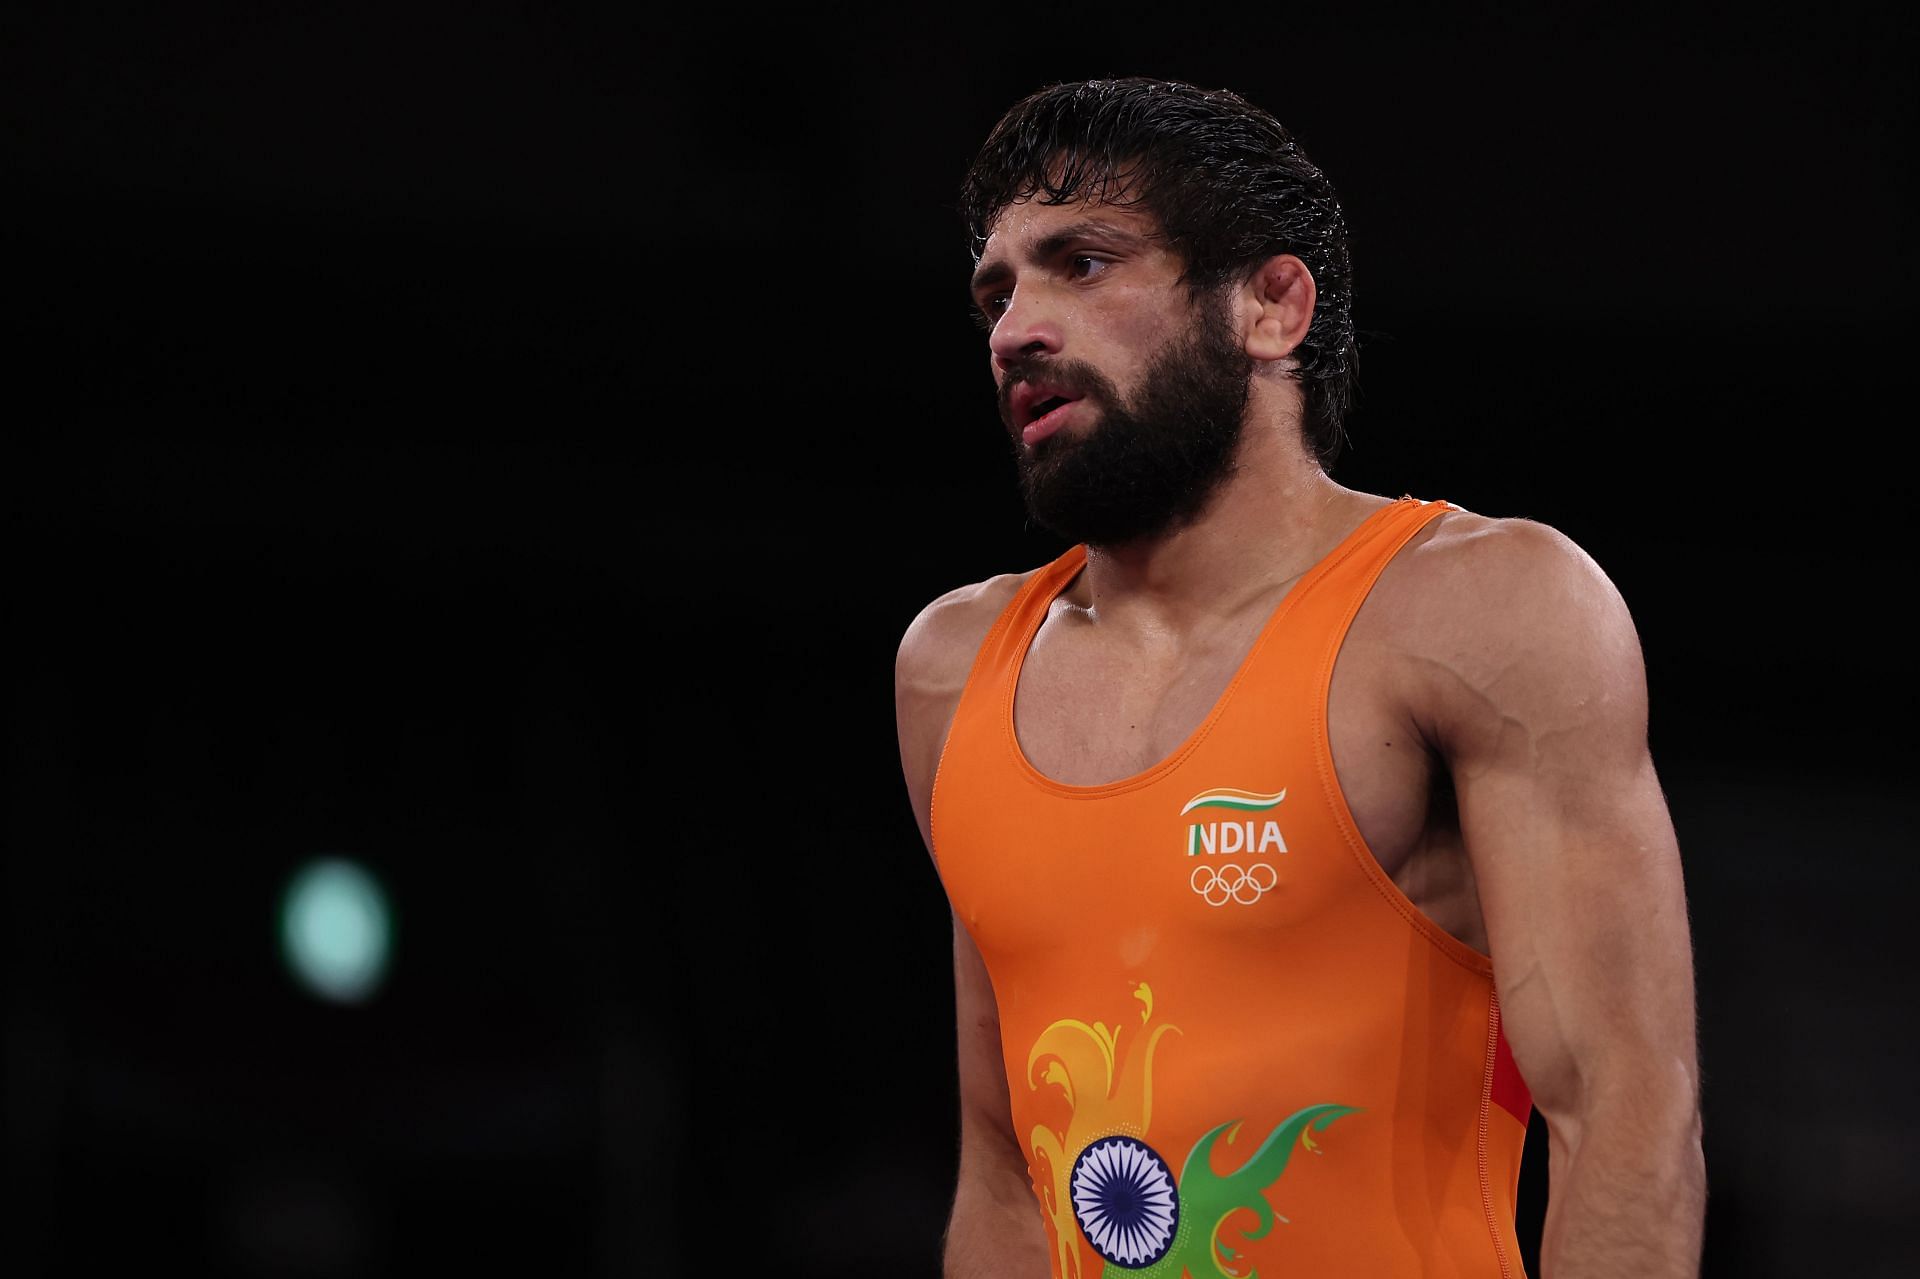 Ravi Dahiya is planning to compete in Commonwealth Games.